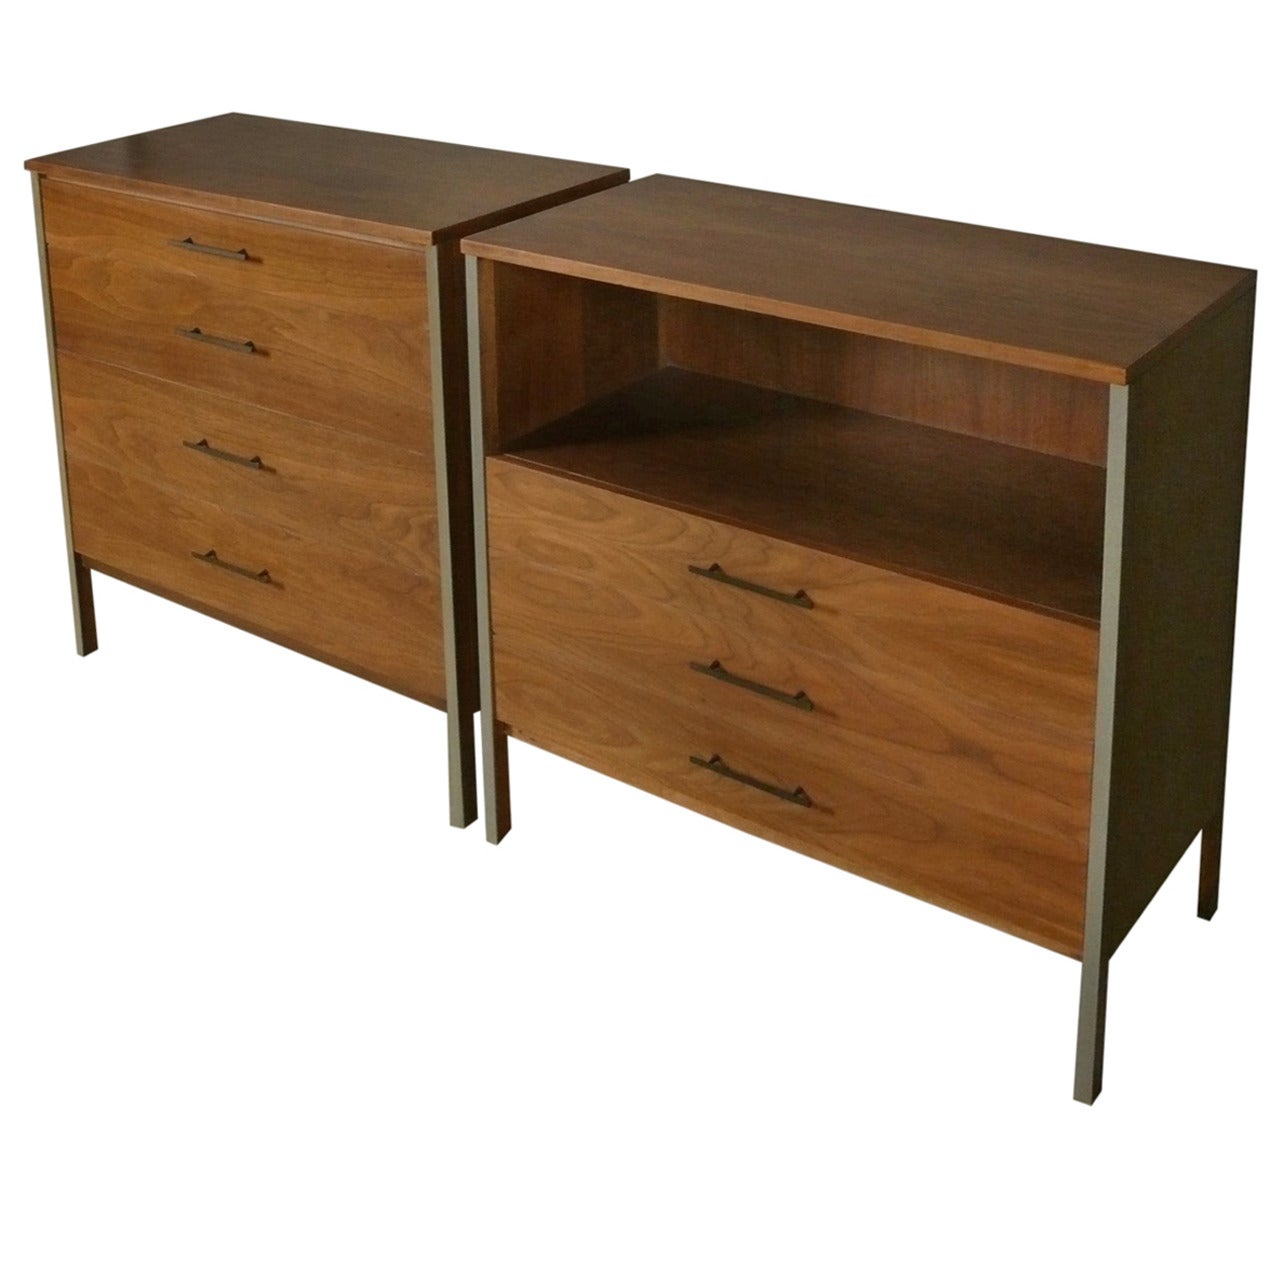 Pair of Walnut Cabinets or Night Stands by Paul McCobb for Calvin